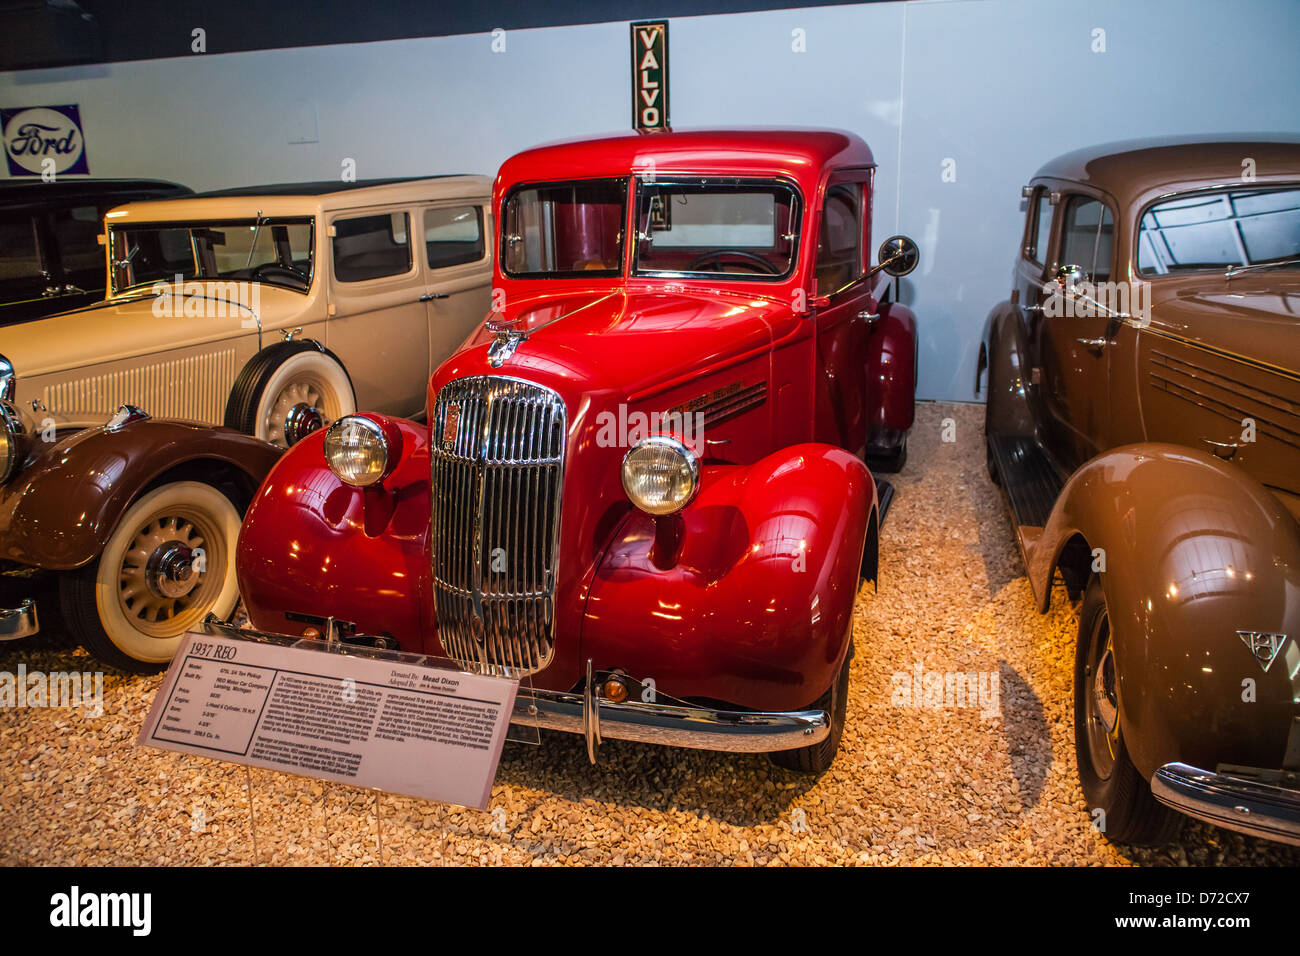 A 1937 REO 3/4 Ton Pickup Truck at the National Automobile museum in Reno Nevada Stock Photo